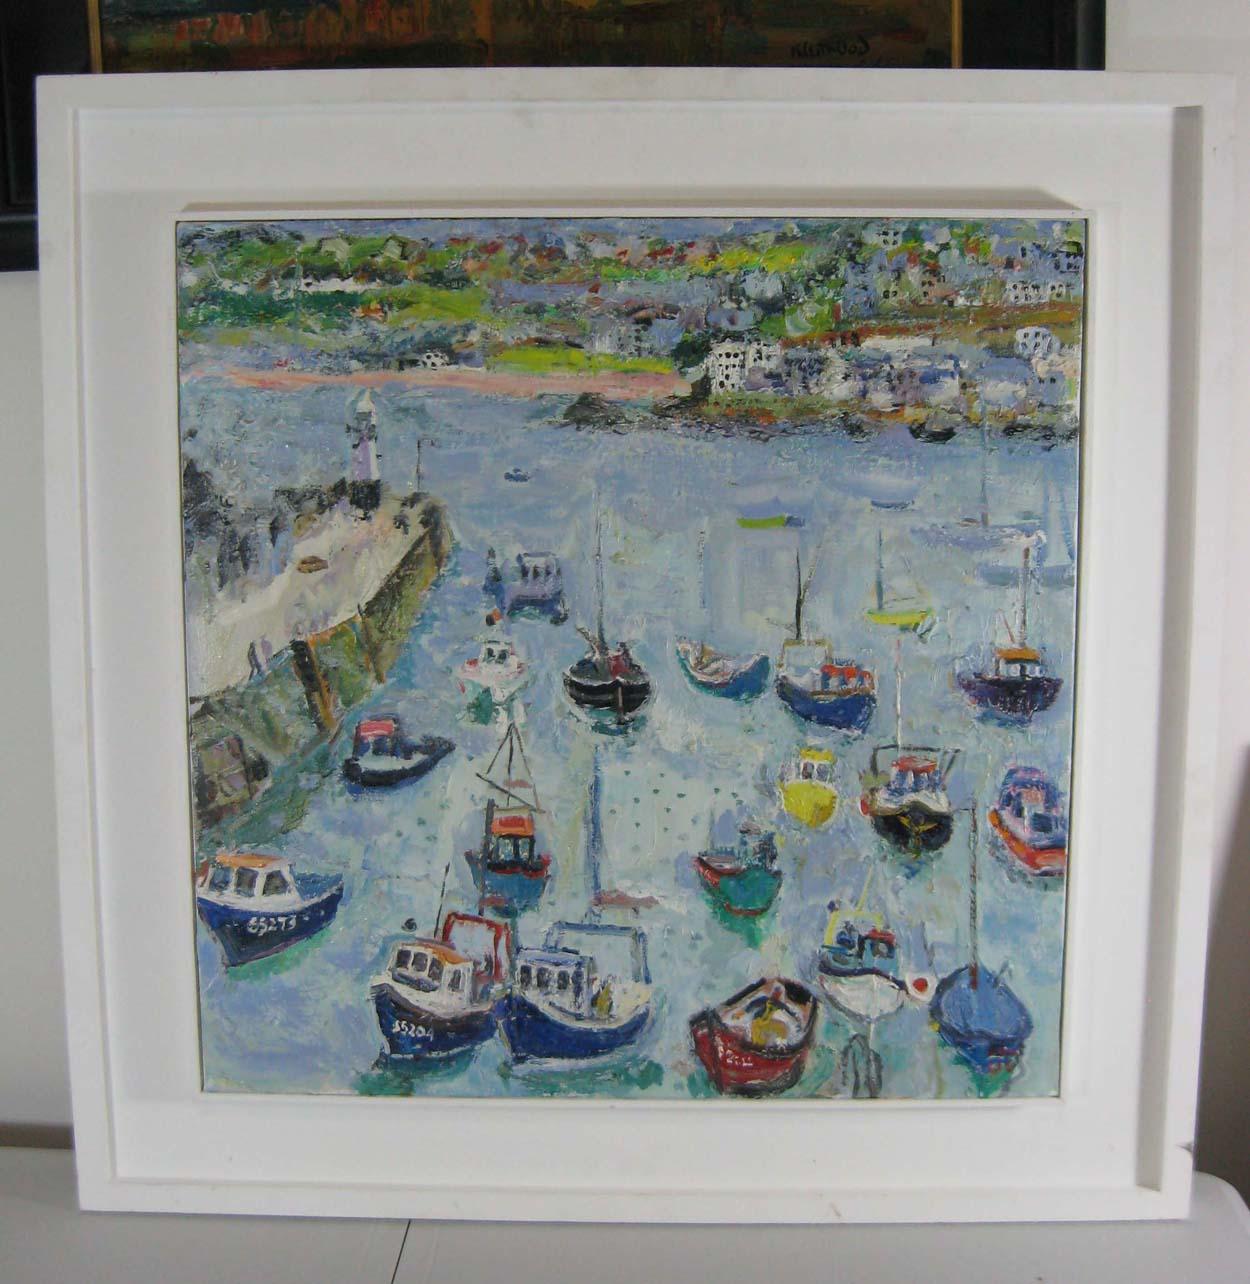 Linda Weir 'English', St Ives Harbour Cornwall, Oil on Canvas, Painted in 2006 6